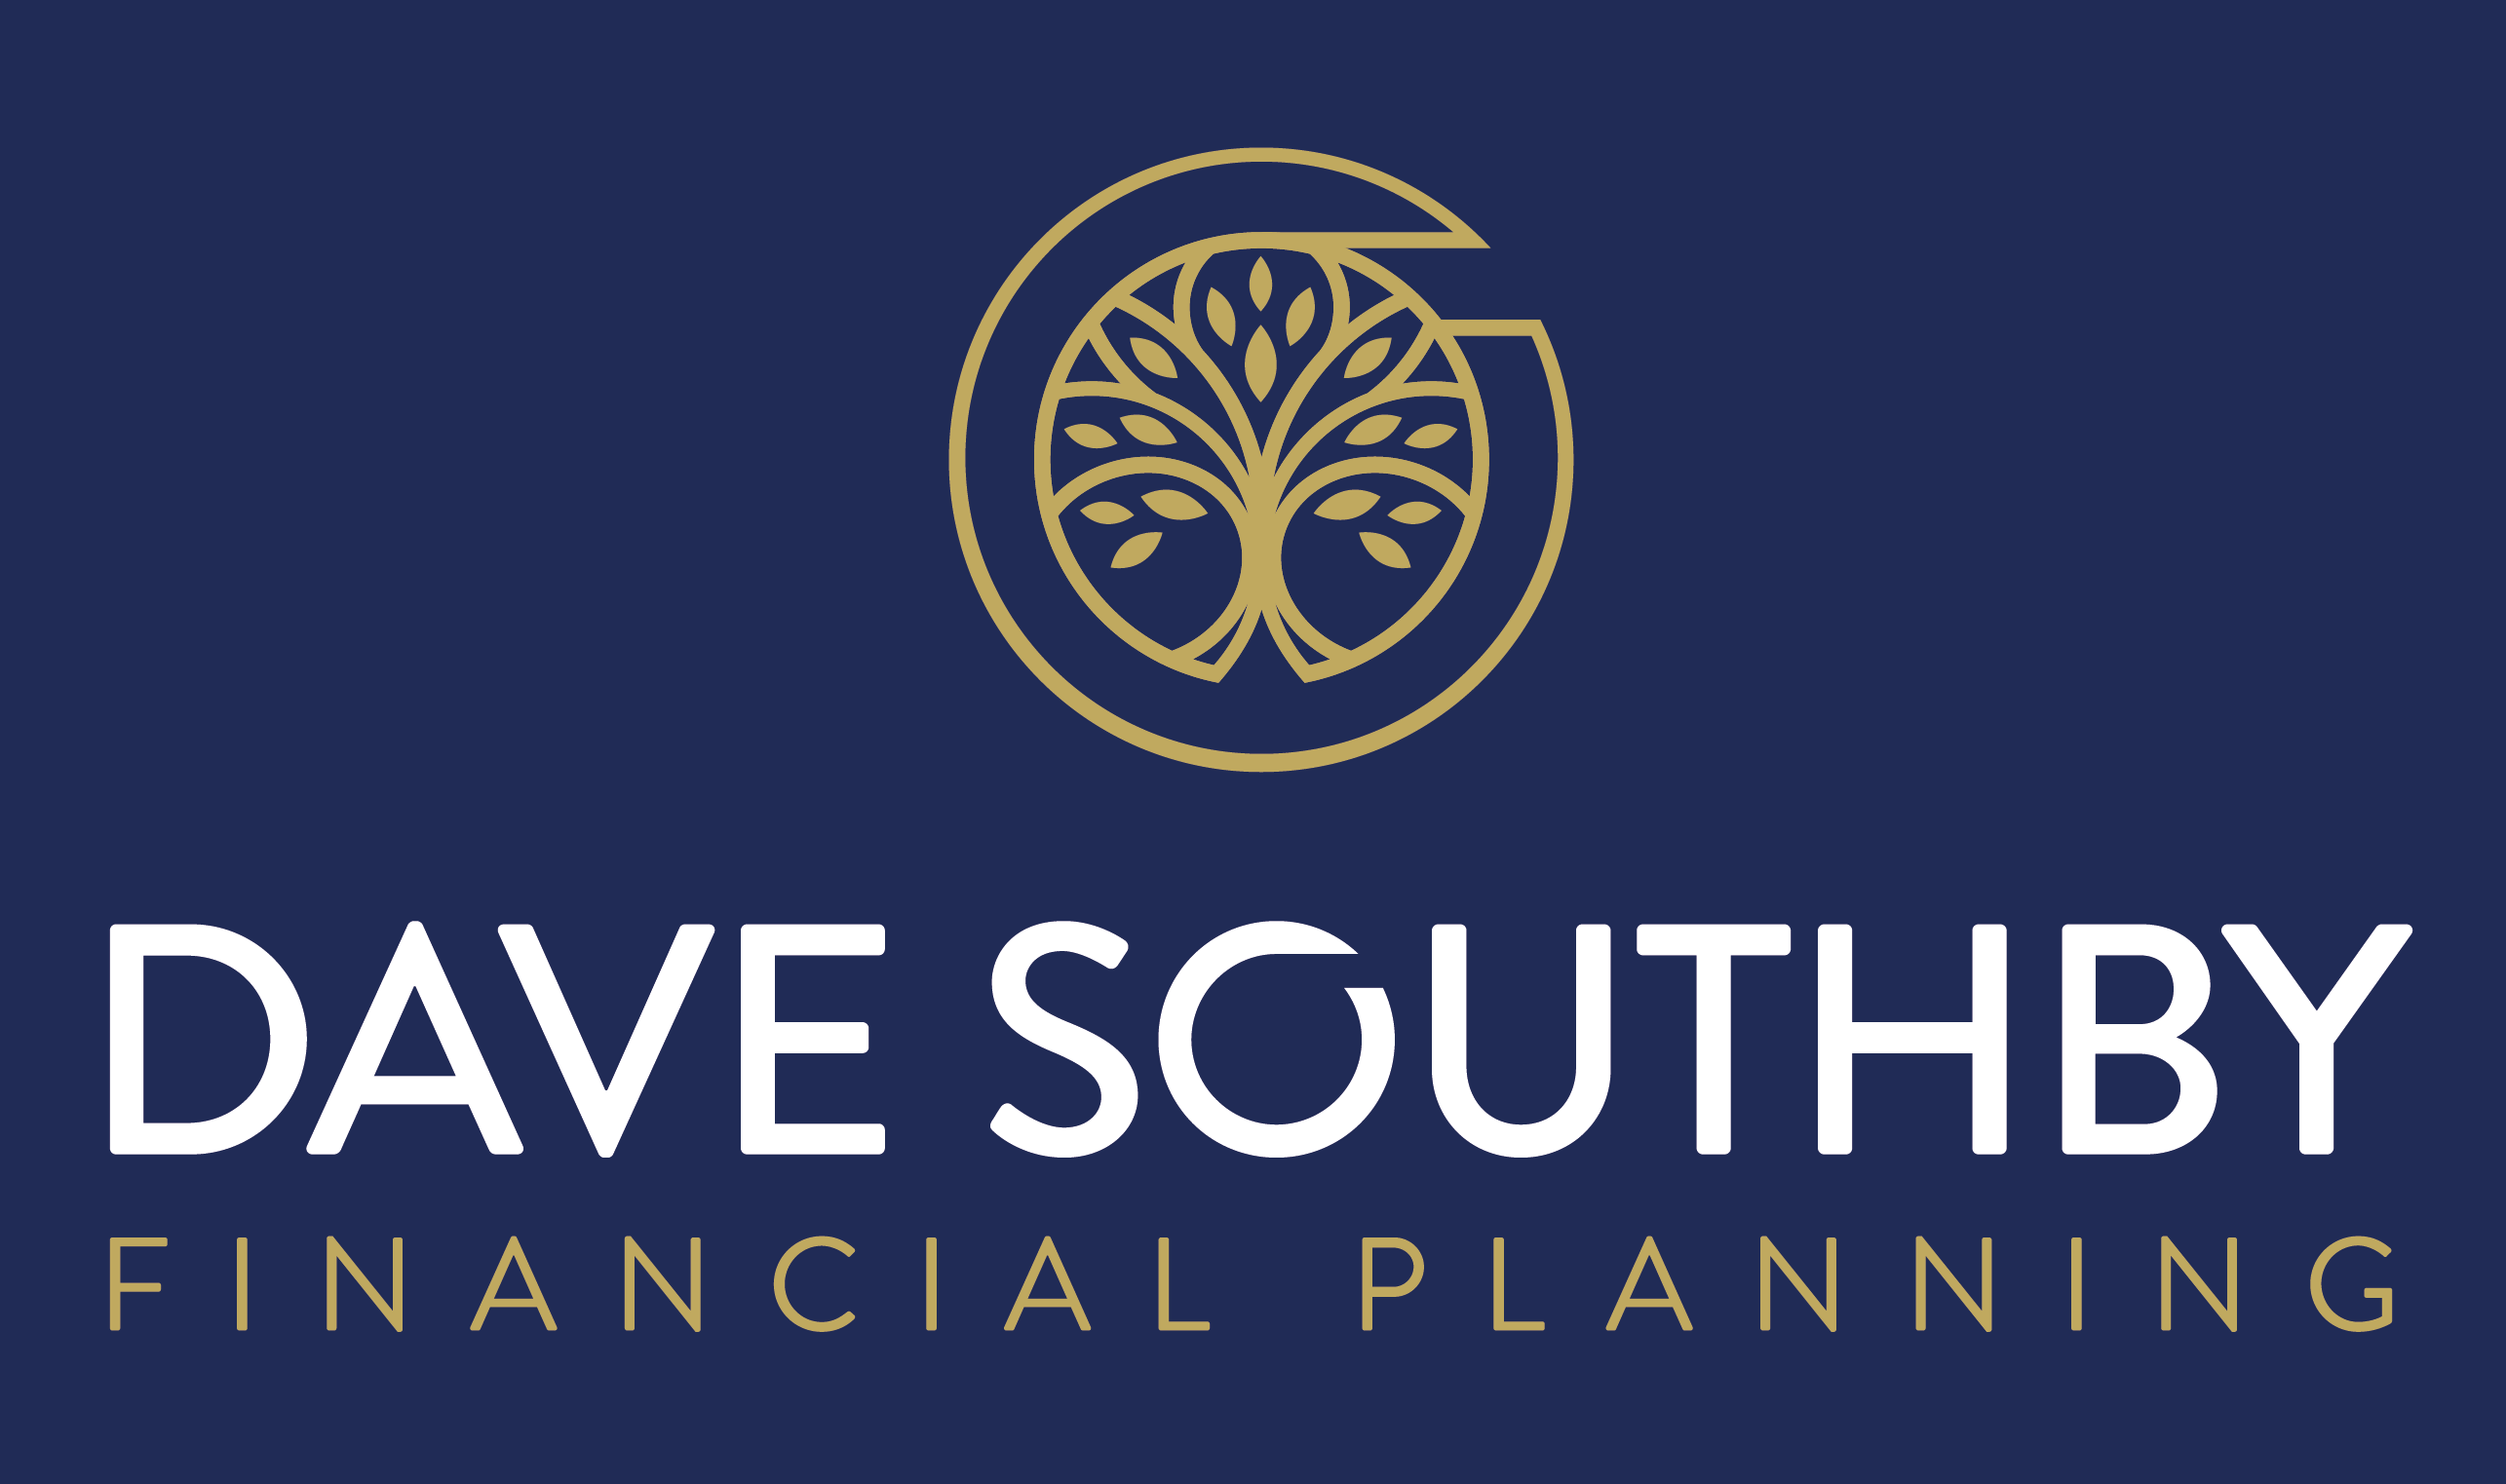 Company logo image - Dave Southby Financial Planning Ltd